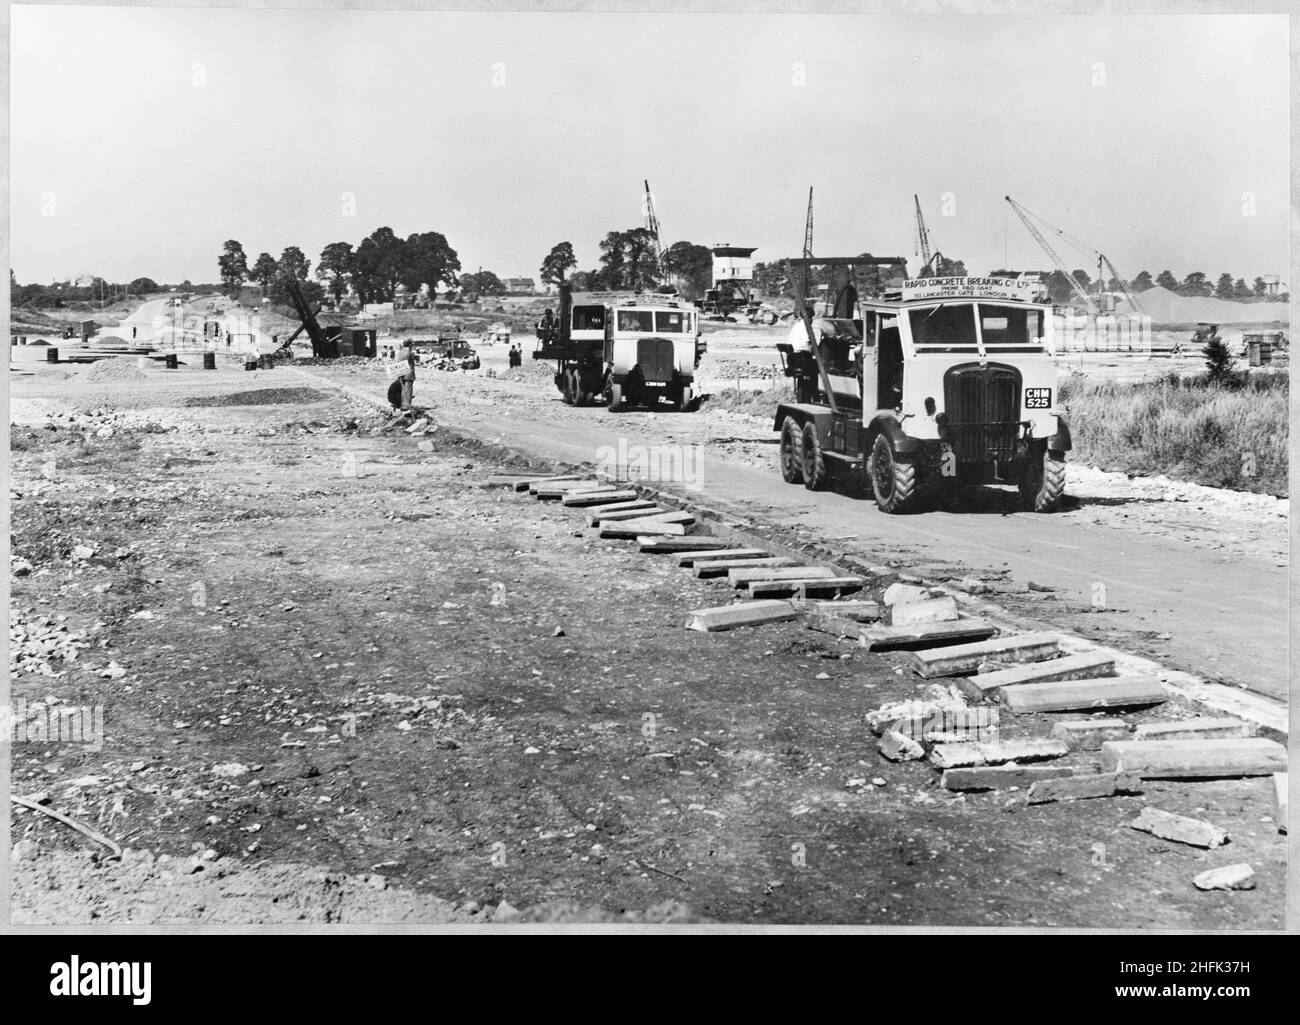 Filton Airfield, South Gloucestershire, 30/04/1950. Rapid Concrete Breaking Co Ltd trucks at Filton Airfield during construction of a runway, with construction work in progress beyond. Laing extended the runway westwards at Filton Airfield to accommodate the Bristol Brabazon airliner, which was being built at the airfield. Work began in July 1946 on the new runway, which was 2,725 yards long and 100 yards wide. The work required the requisitioning and removal of Charlton village and a temporary flying strip was laid, for use while the new runway was under construction. Stock Photo